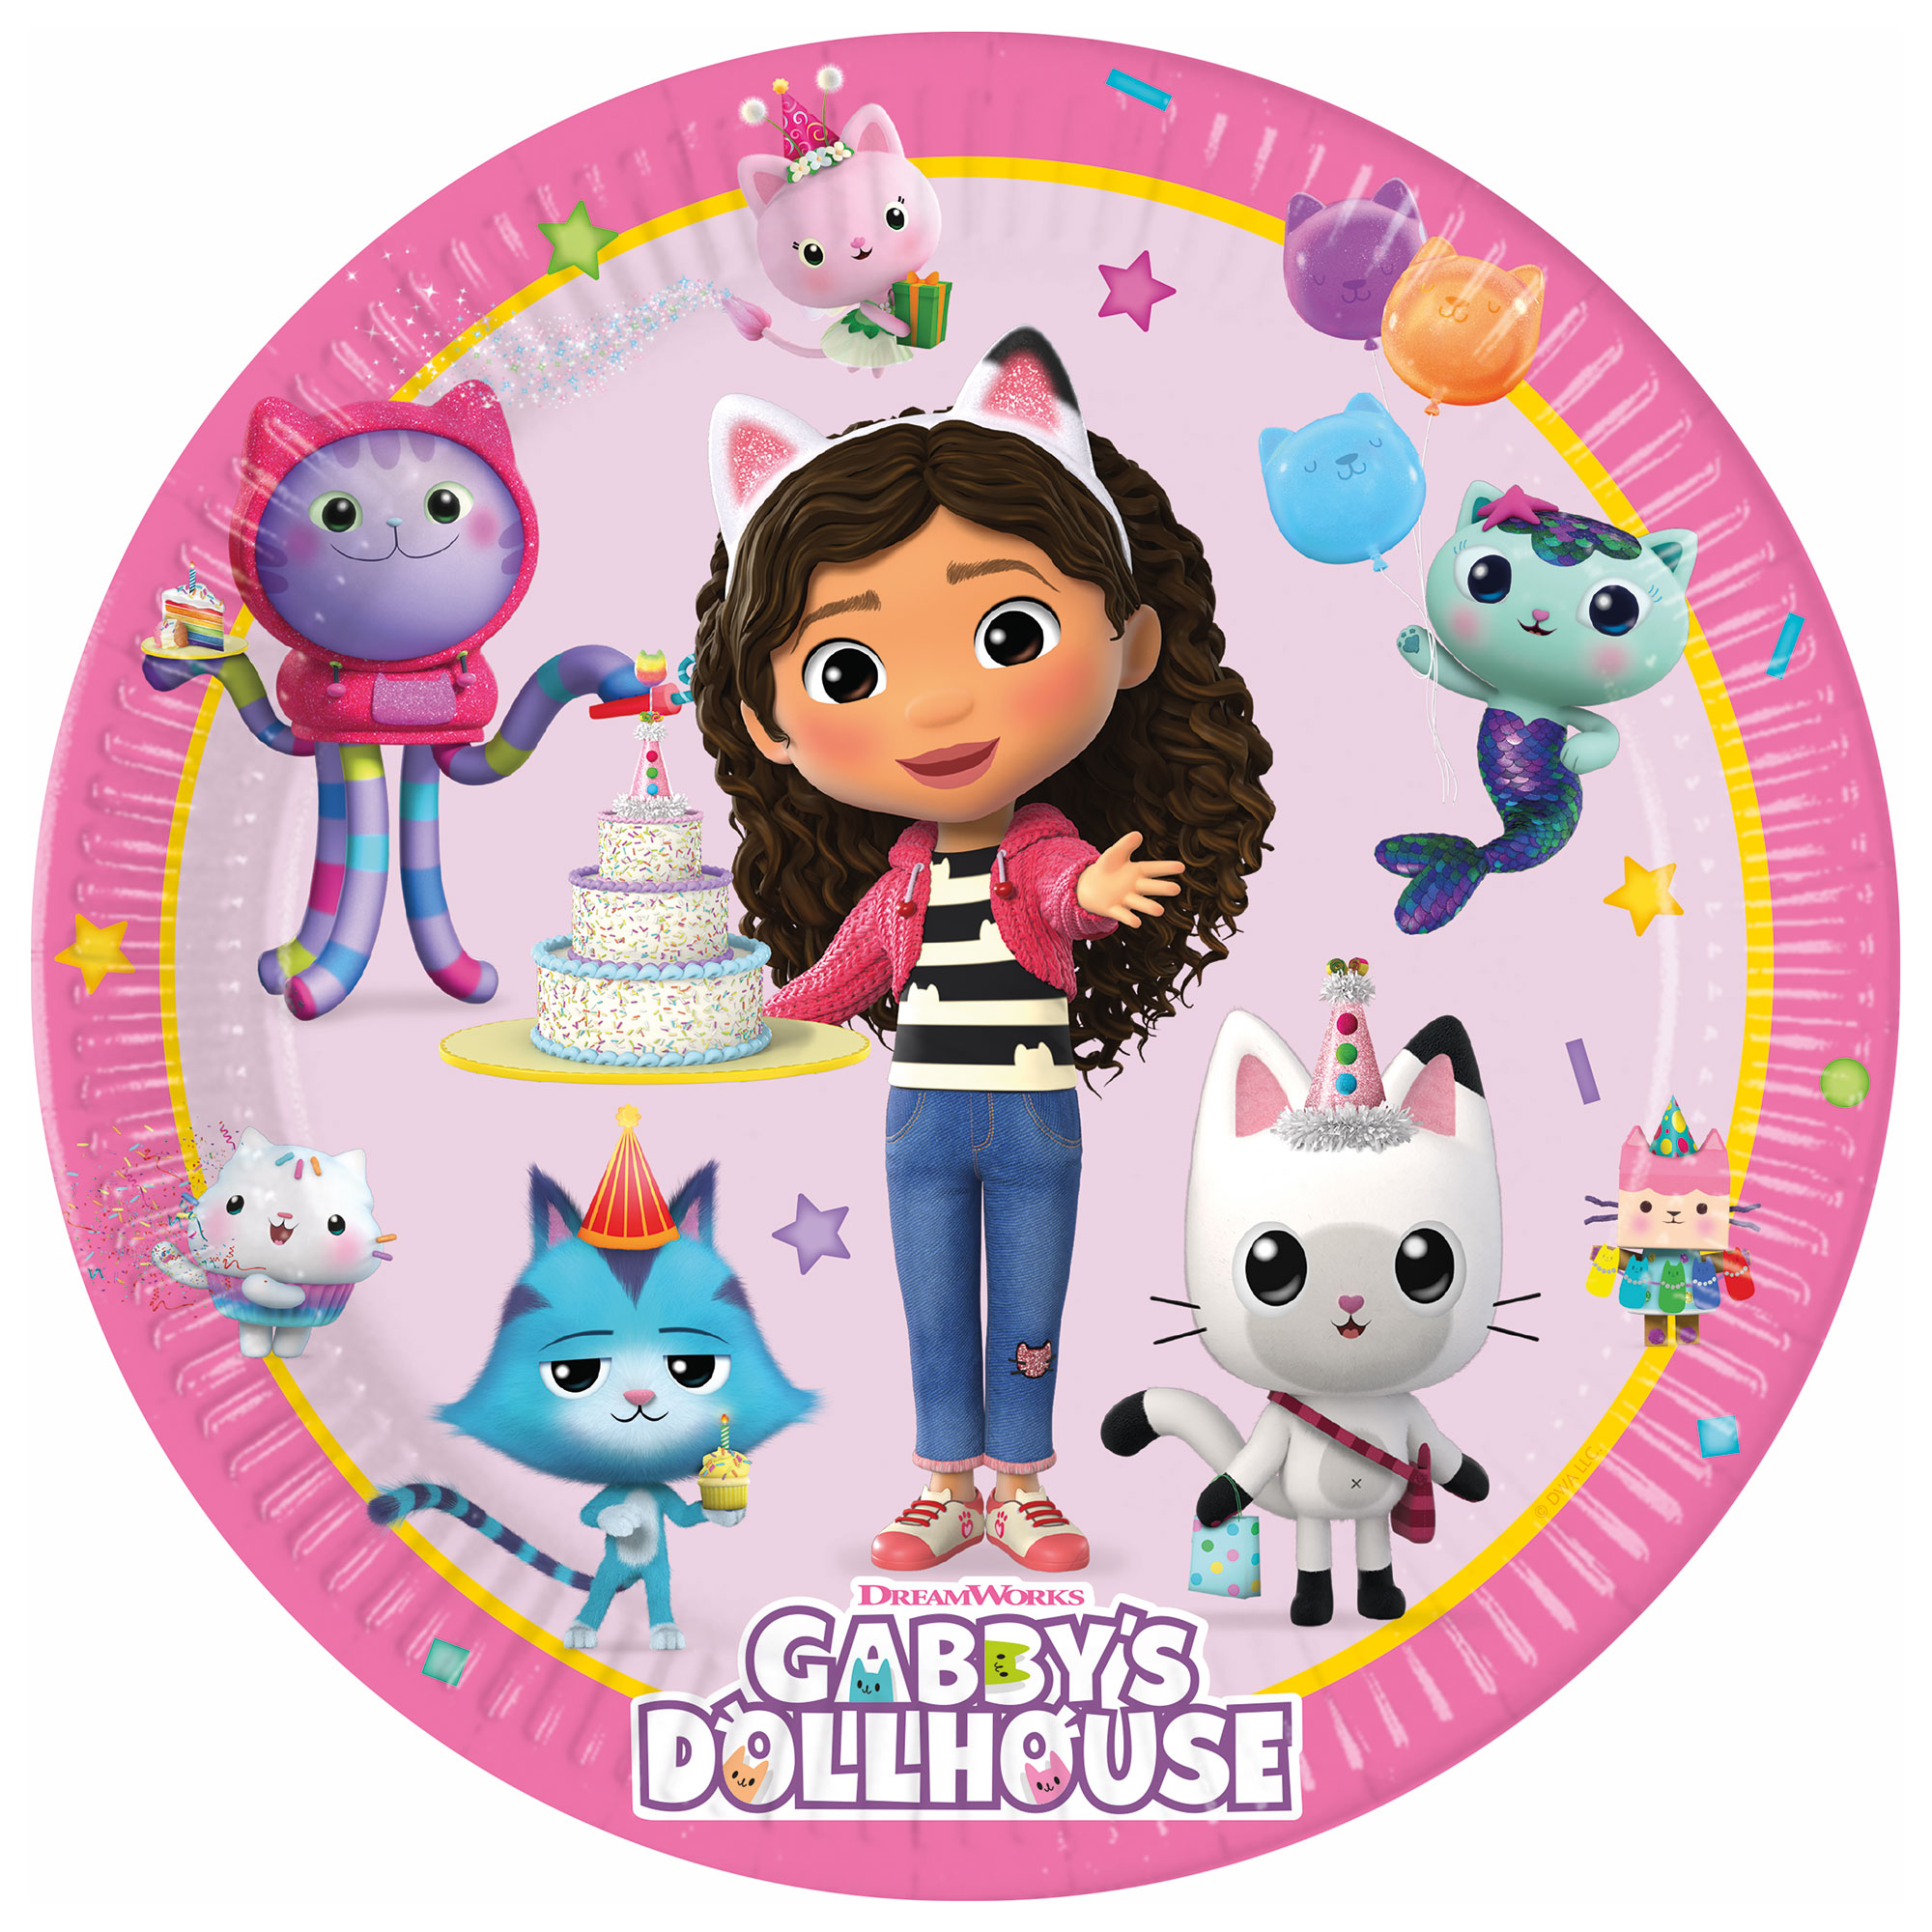 Gabby's Dollhouse Party Tableware & Decorations Bundle - 16 Guests